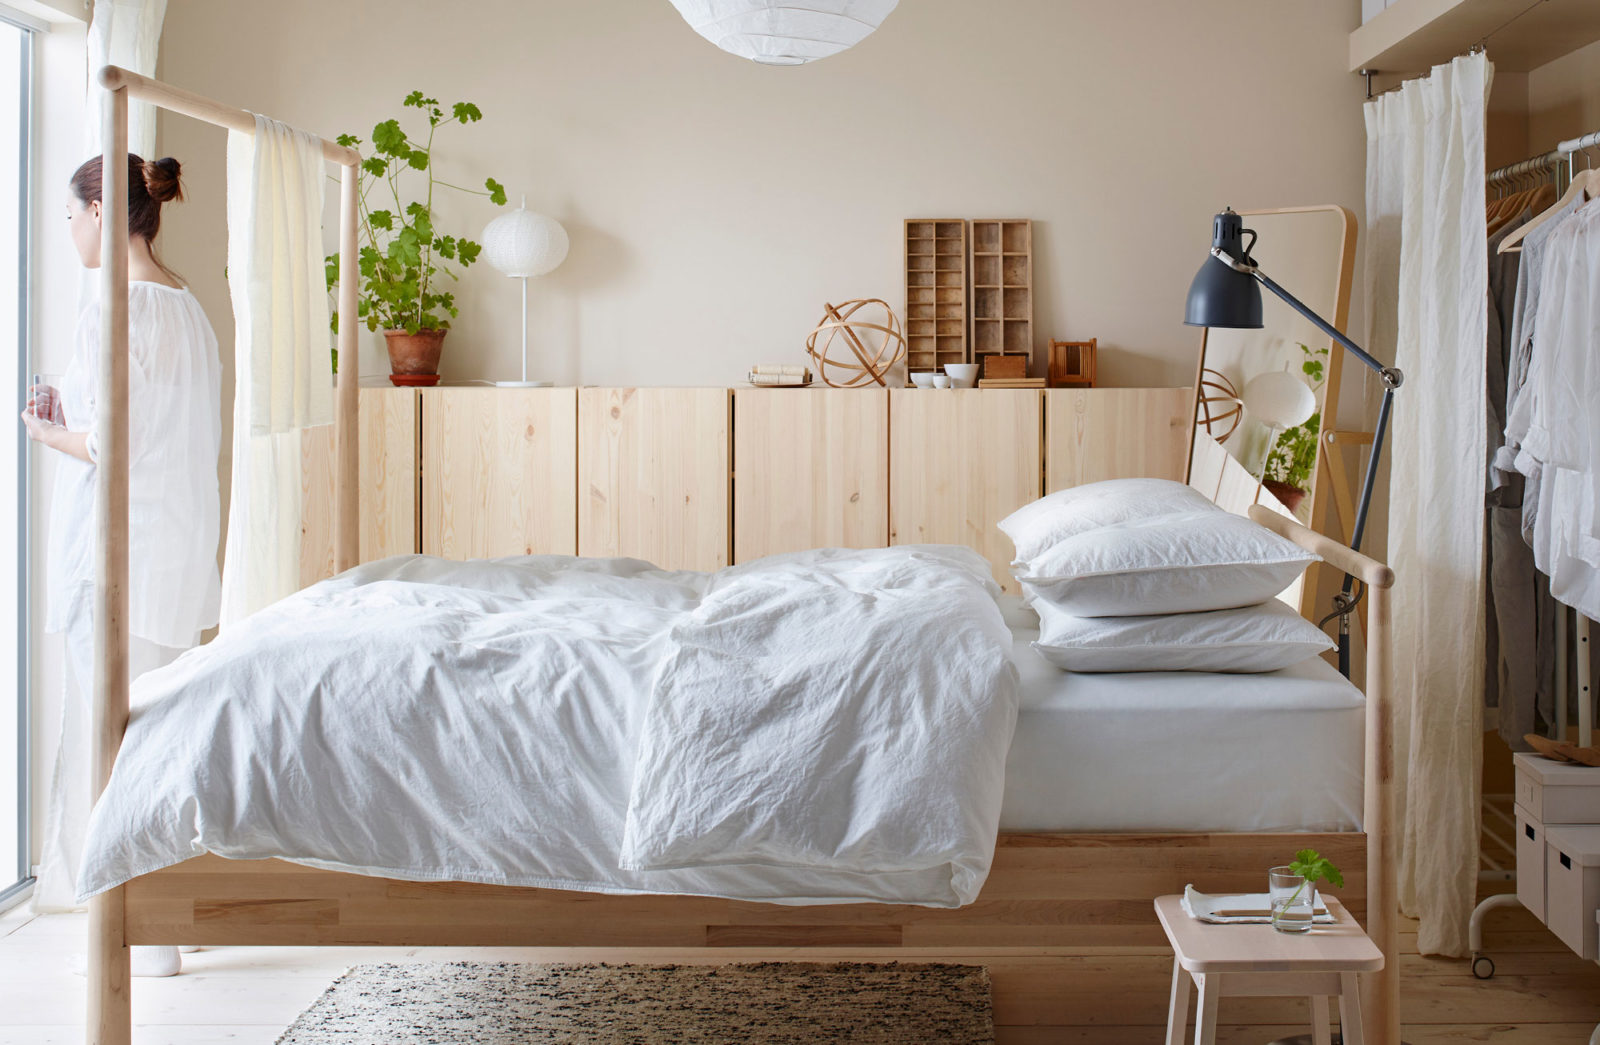 Scandinavian style bedroom with blond wood furnishings, white bed linen, a woman stands by bed with a glass of water.